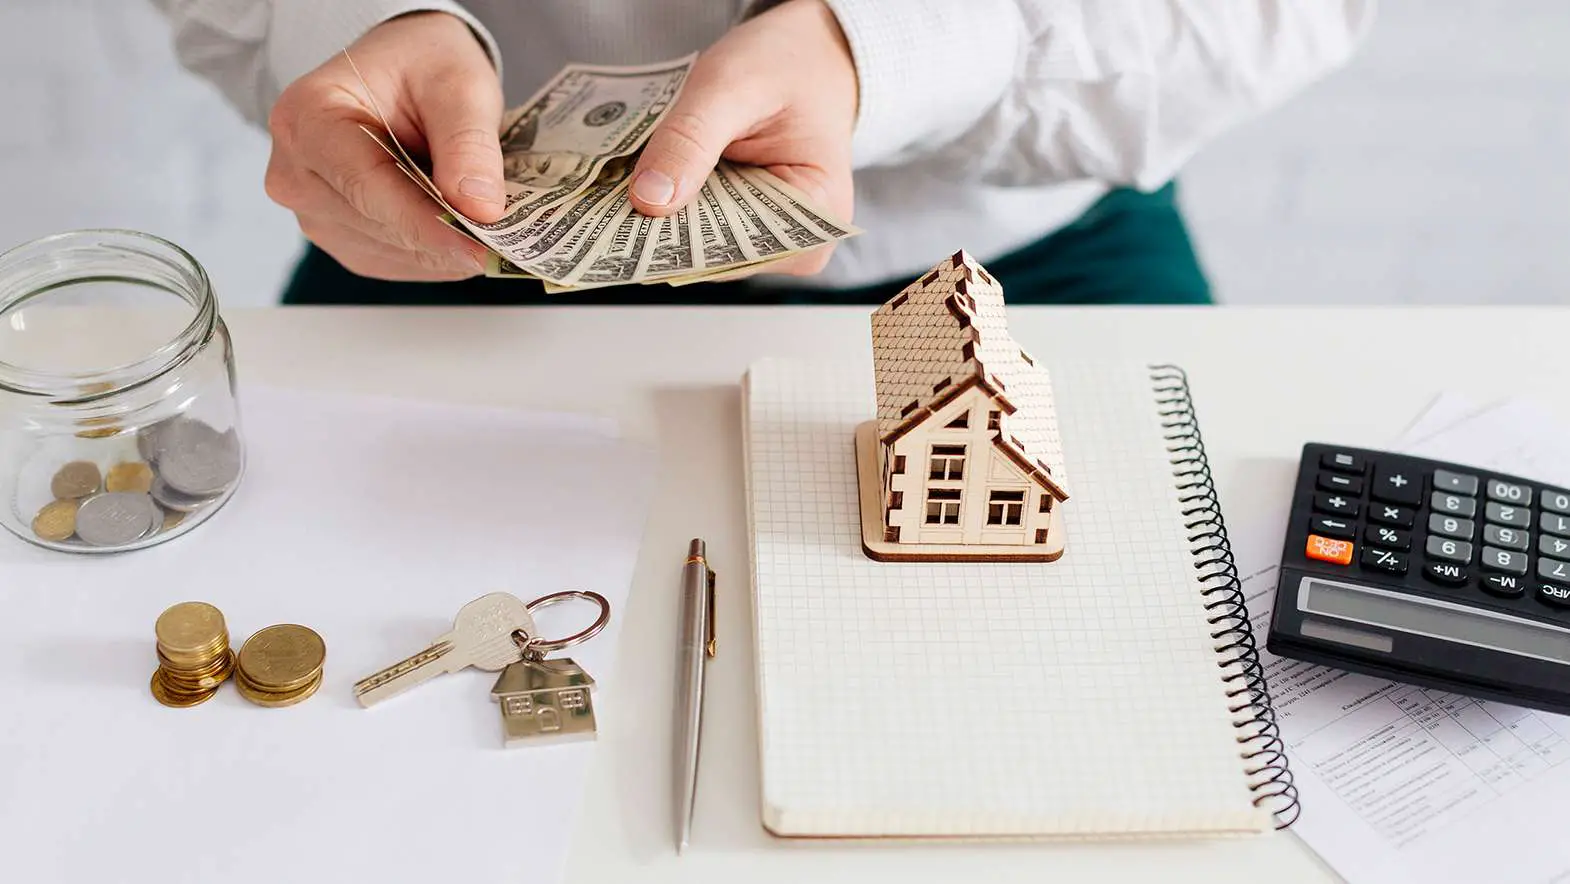 2019 and Your New Goals: How Much Mortgage Can I Get?